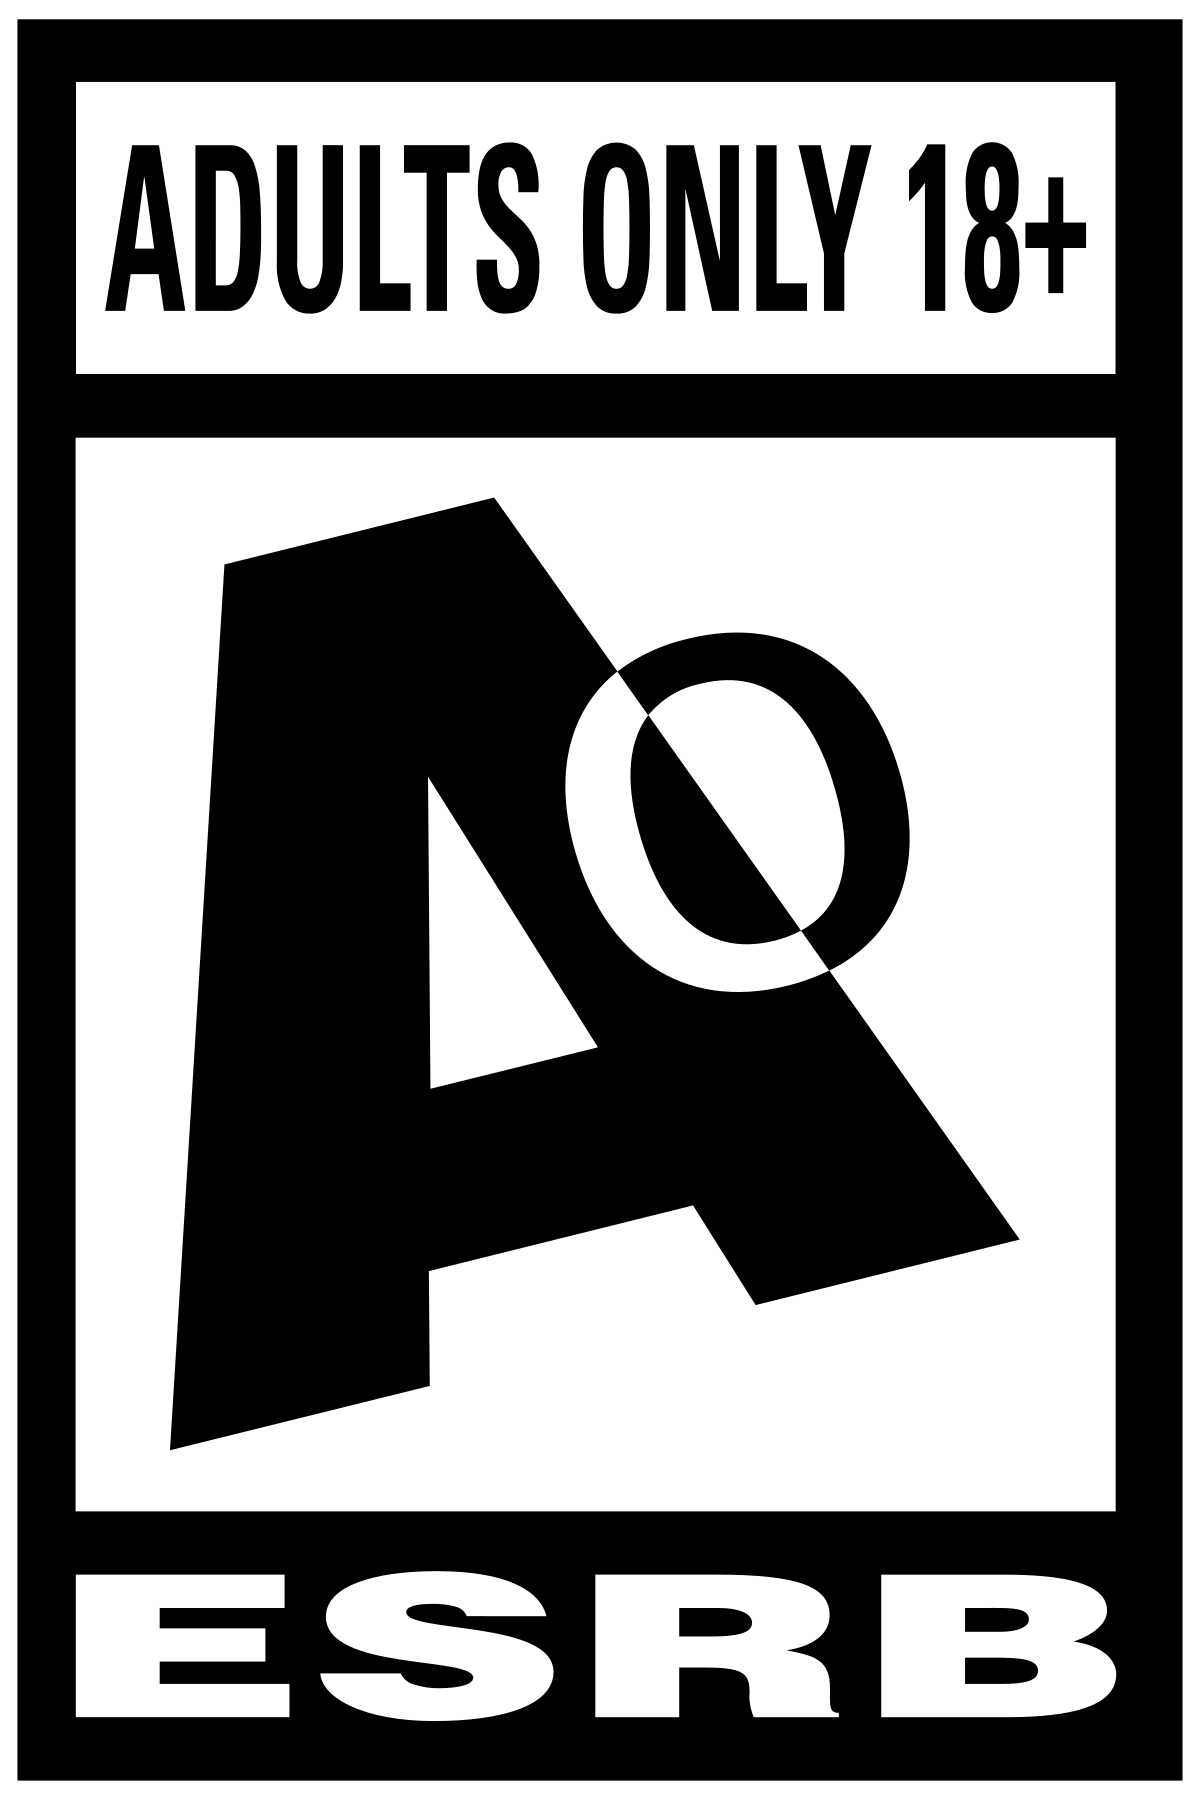 List of AO-rated video games - Wikipedia